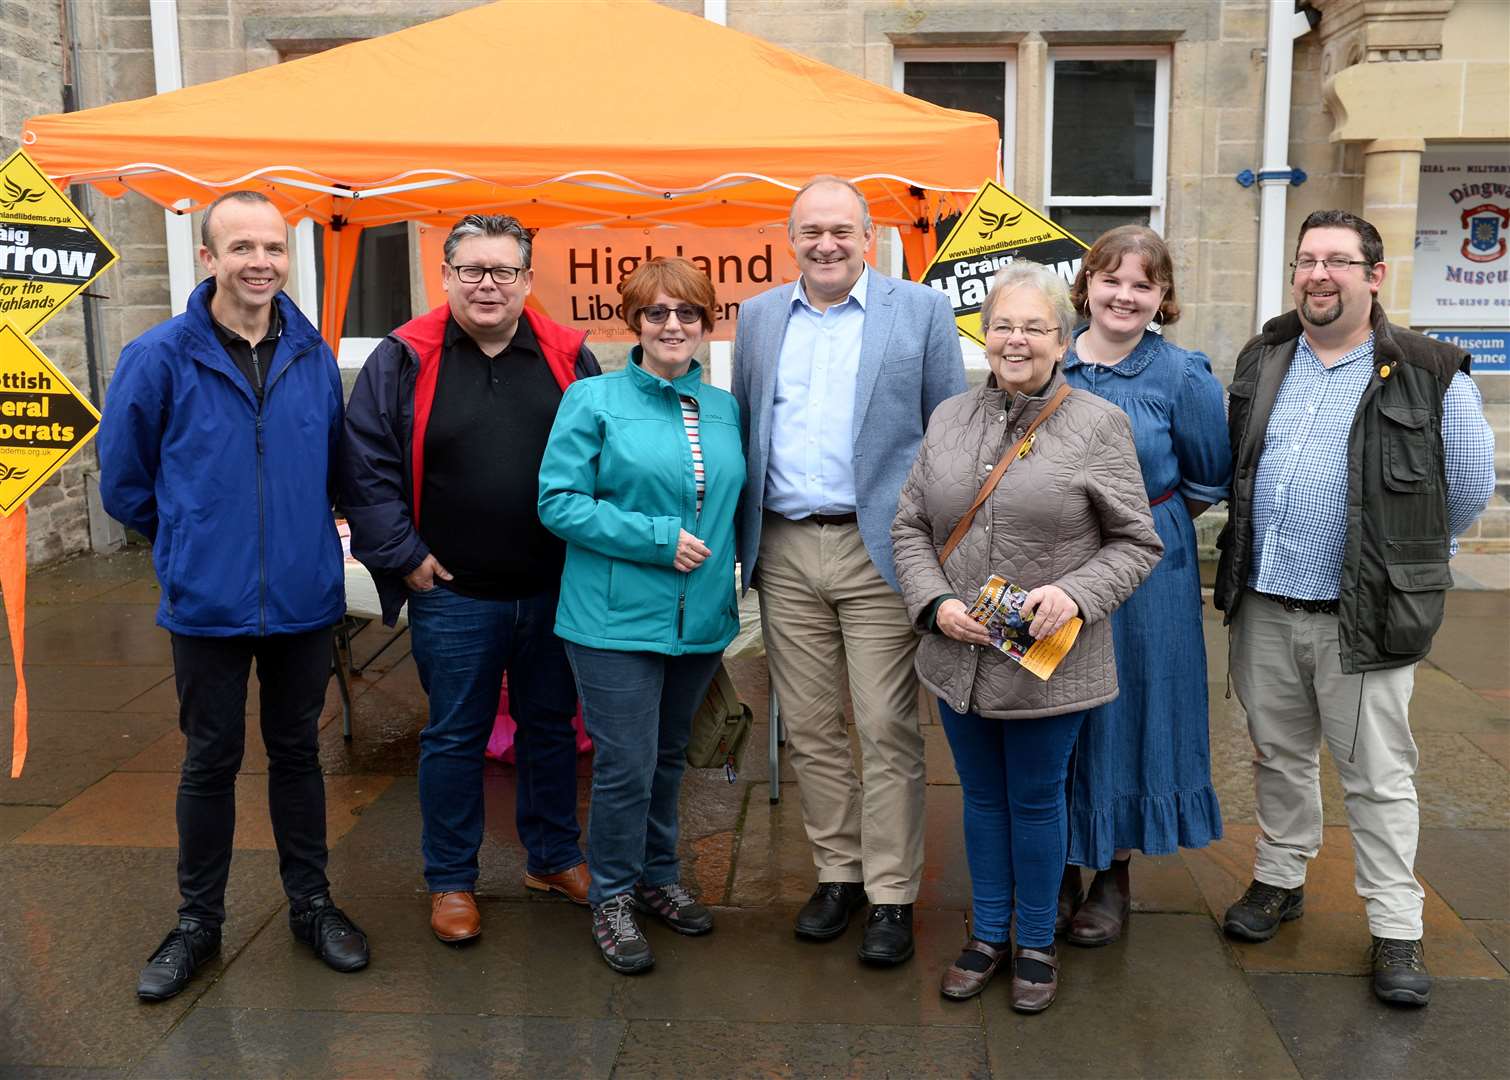 Lib Dem leader Ed Davey (centre) on visit to Dingwall, meeting party members Kevin Ried, Craig Harrow, Angela MacLean, Trish Robertson, Molly Nowland and Jonathan Chartier.